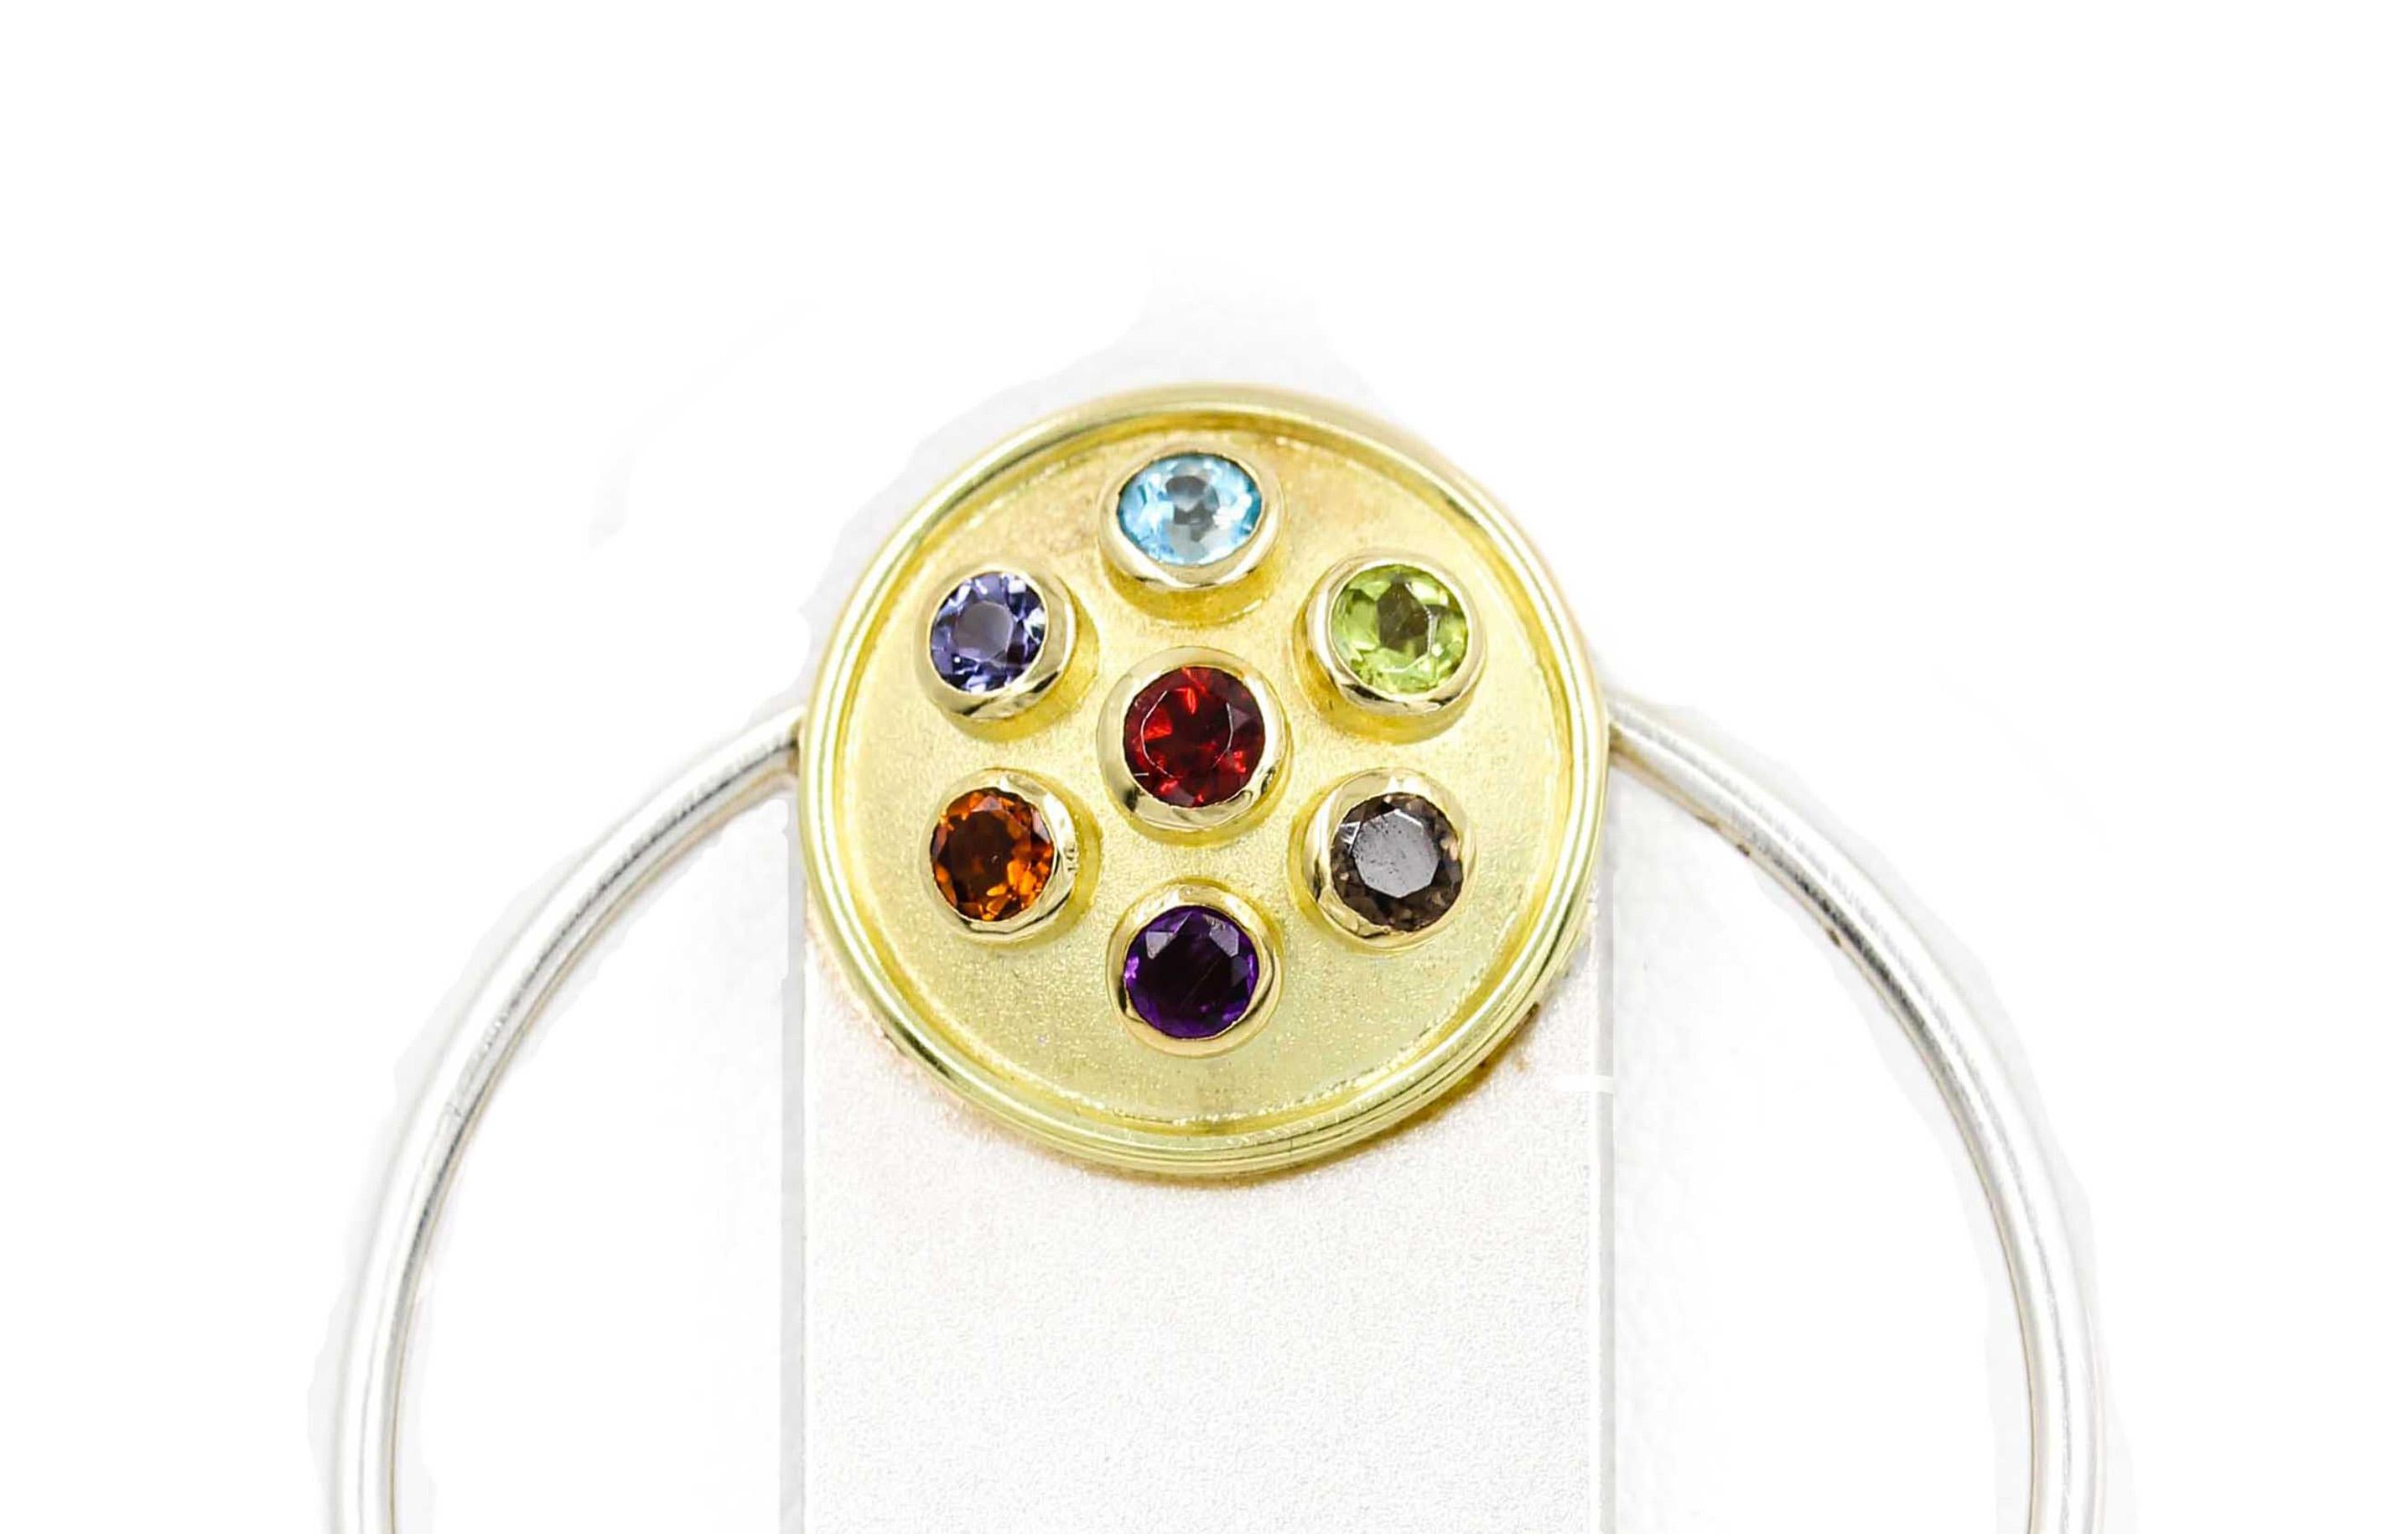 Contemporary Janis Kerman, Gem Stones in Silver and Gold Sundial Pendant Brooch For Sale